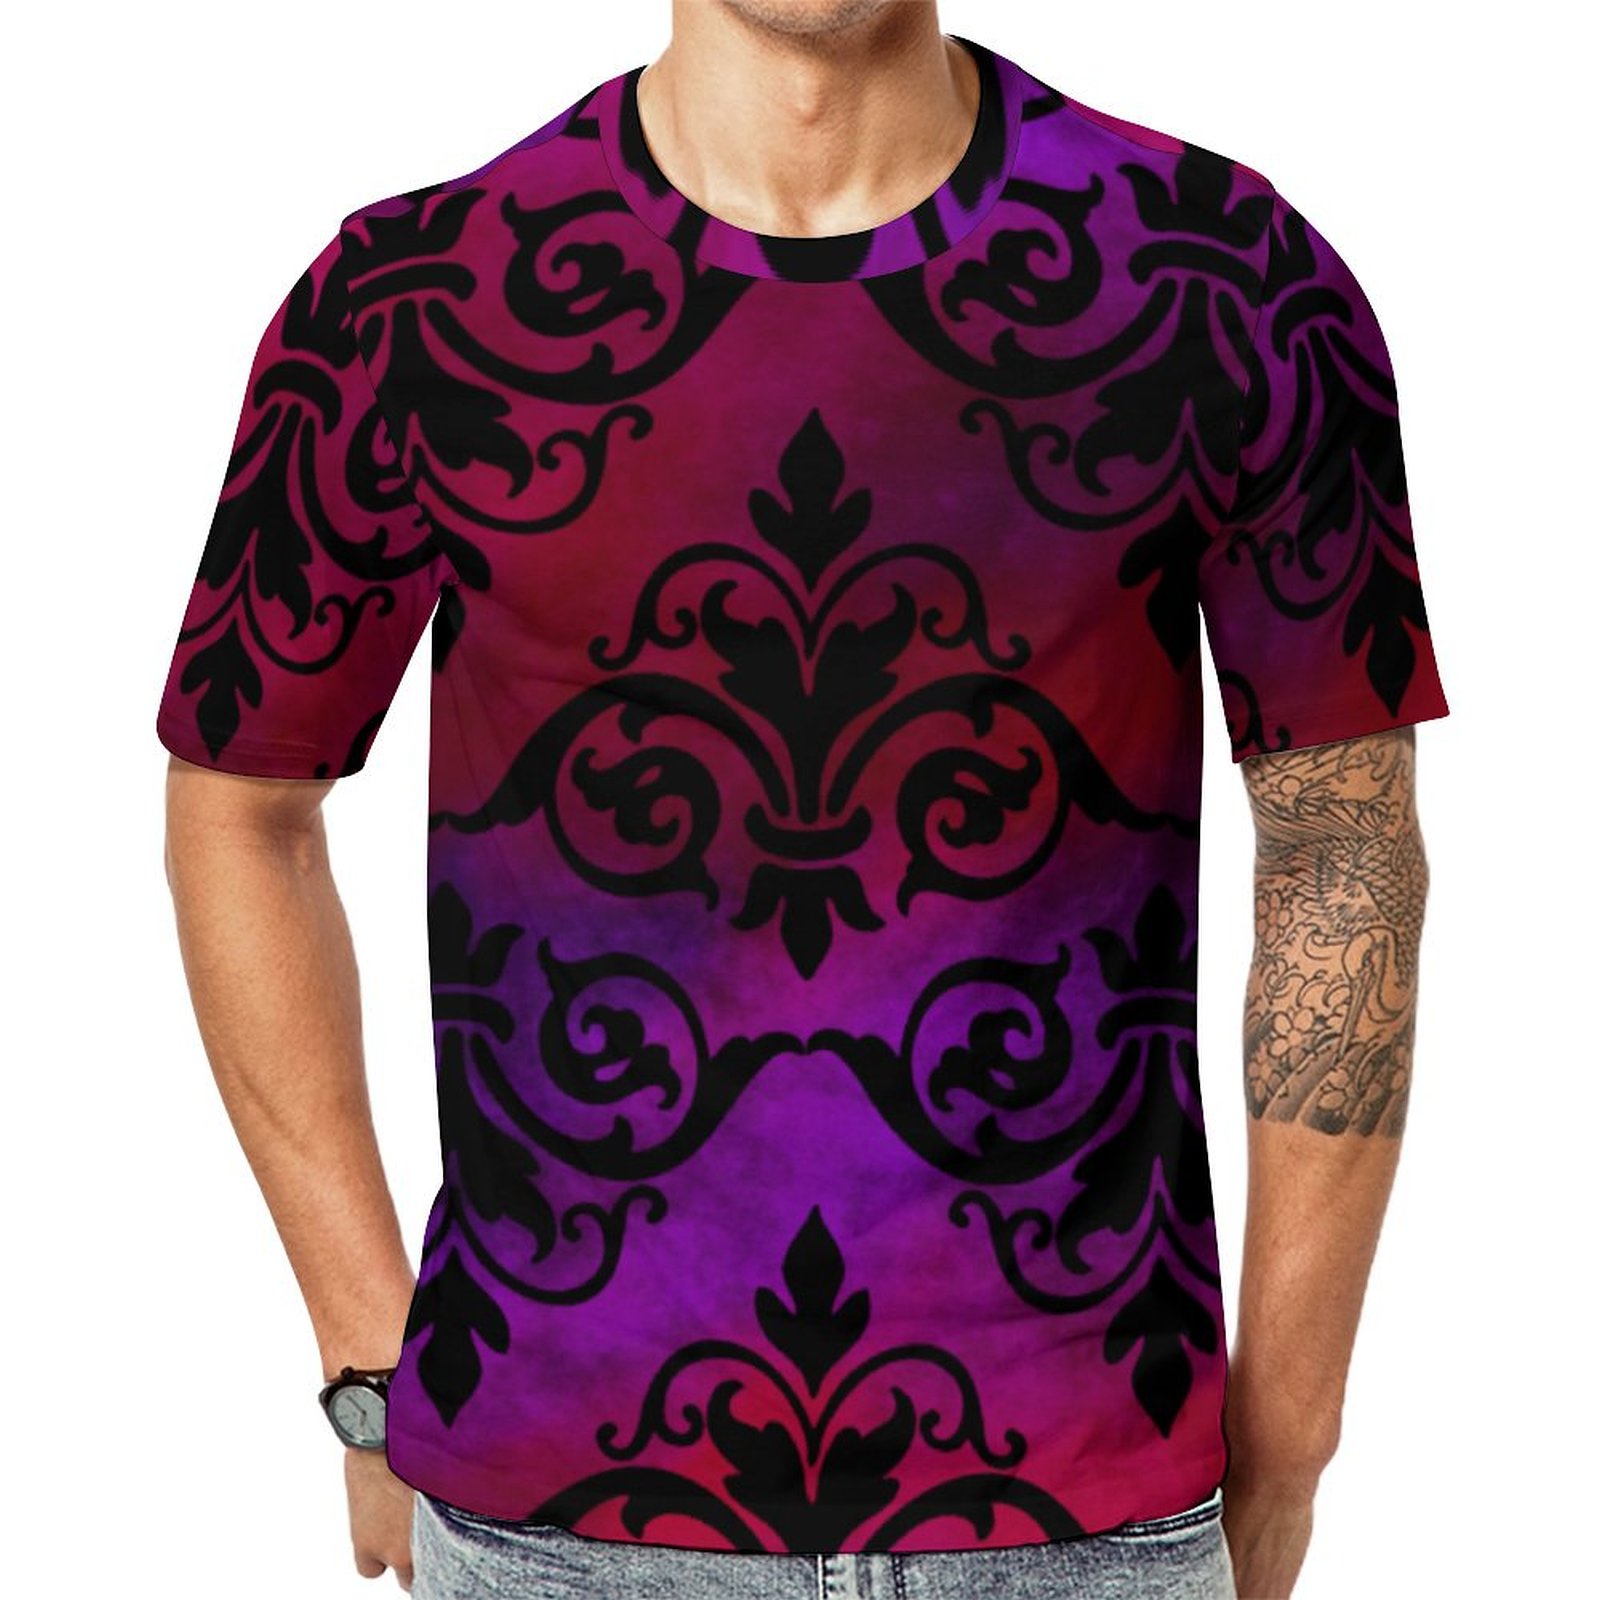 Goth Damask With Black Over Purple And Red Short Sleeve Print Unisex Tshirt Summer Casual Tees for Men and Women Coolcoshirts